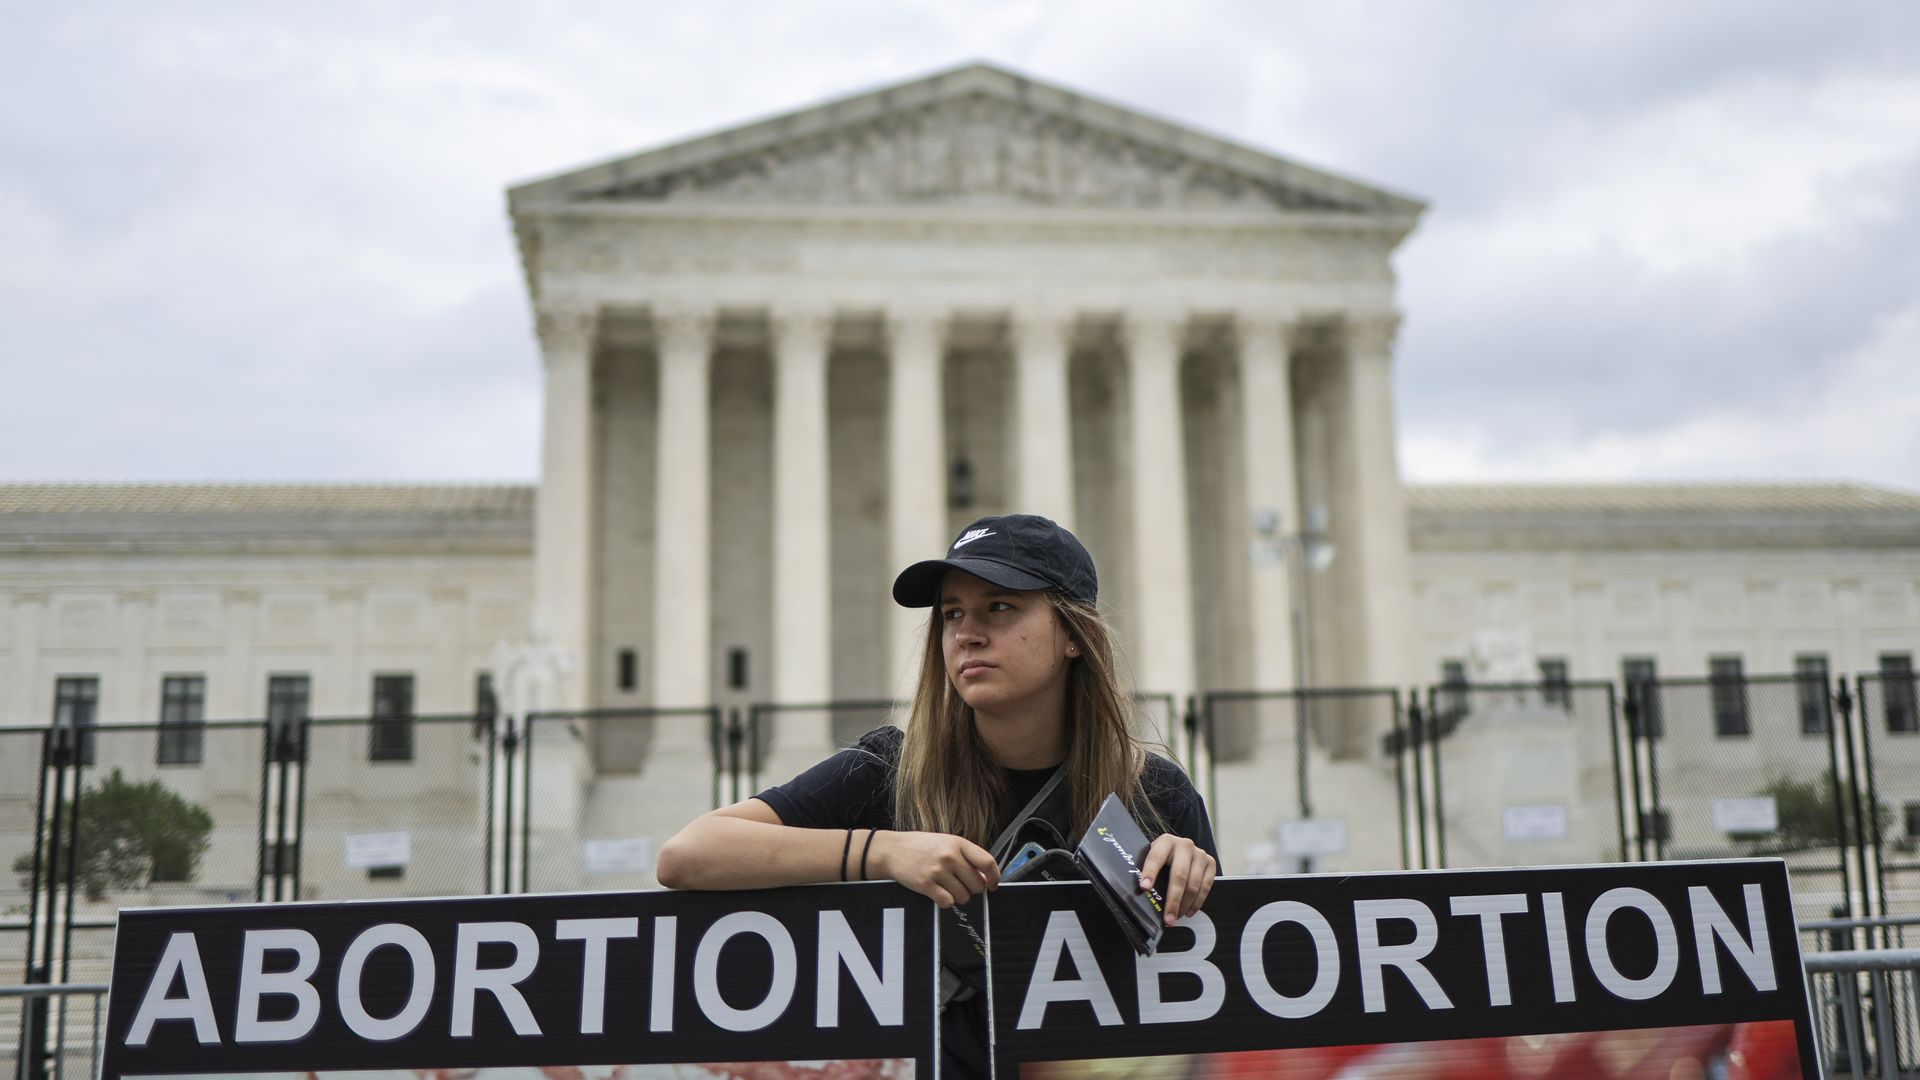 An anti-abortion activist protest outside the U.S. Supreme Court.